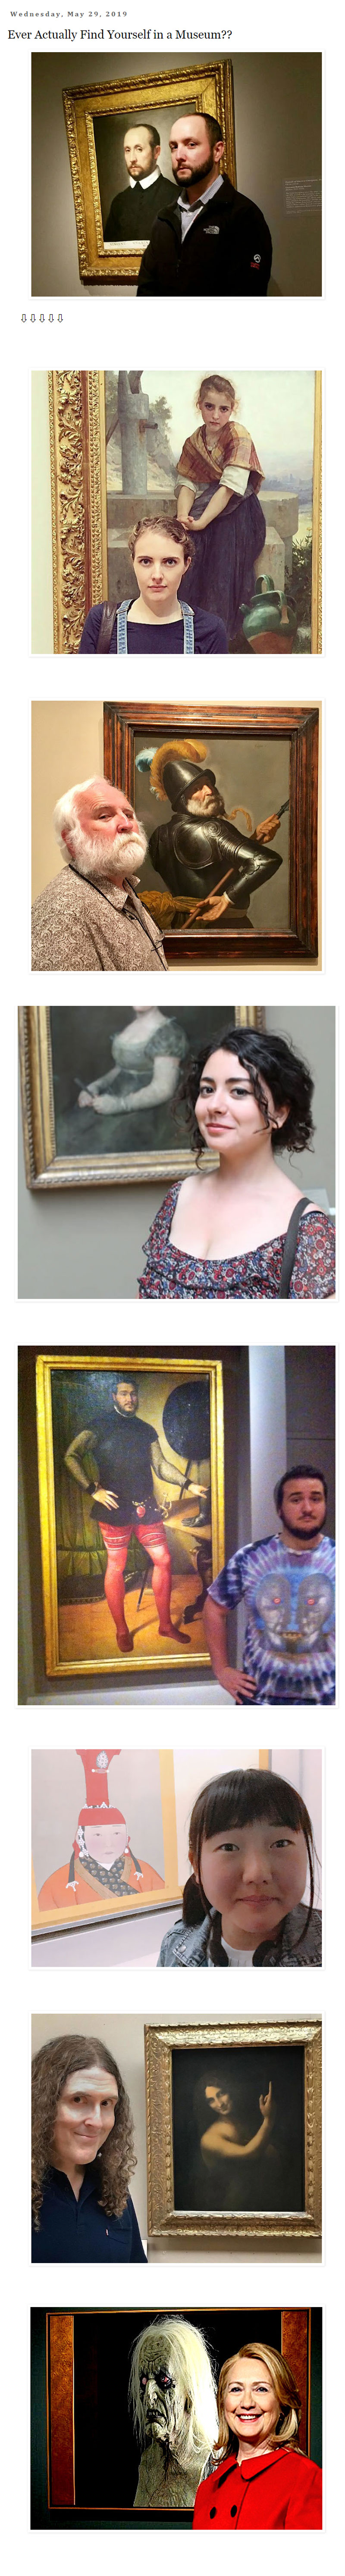 Ever found your portrait in a museum?  These poeple did, according to the folks at Diogenes Middle Finger. - Webmaster 